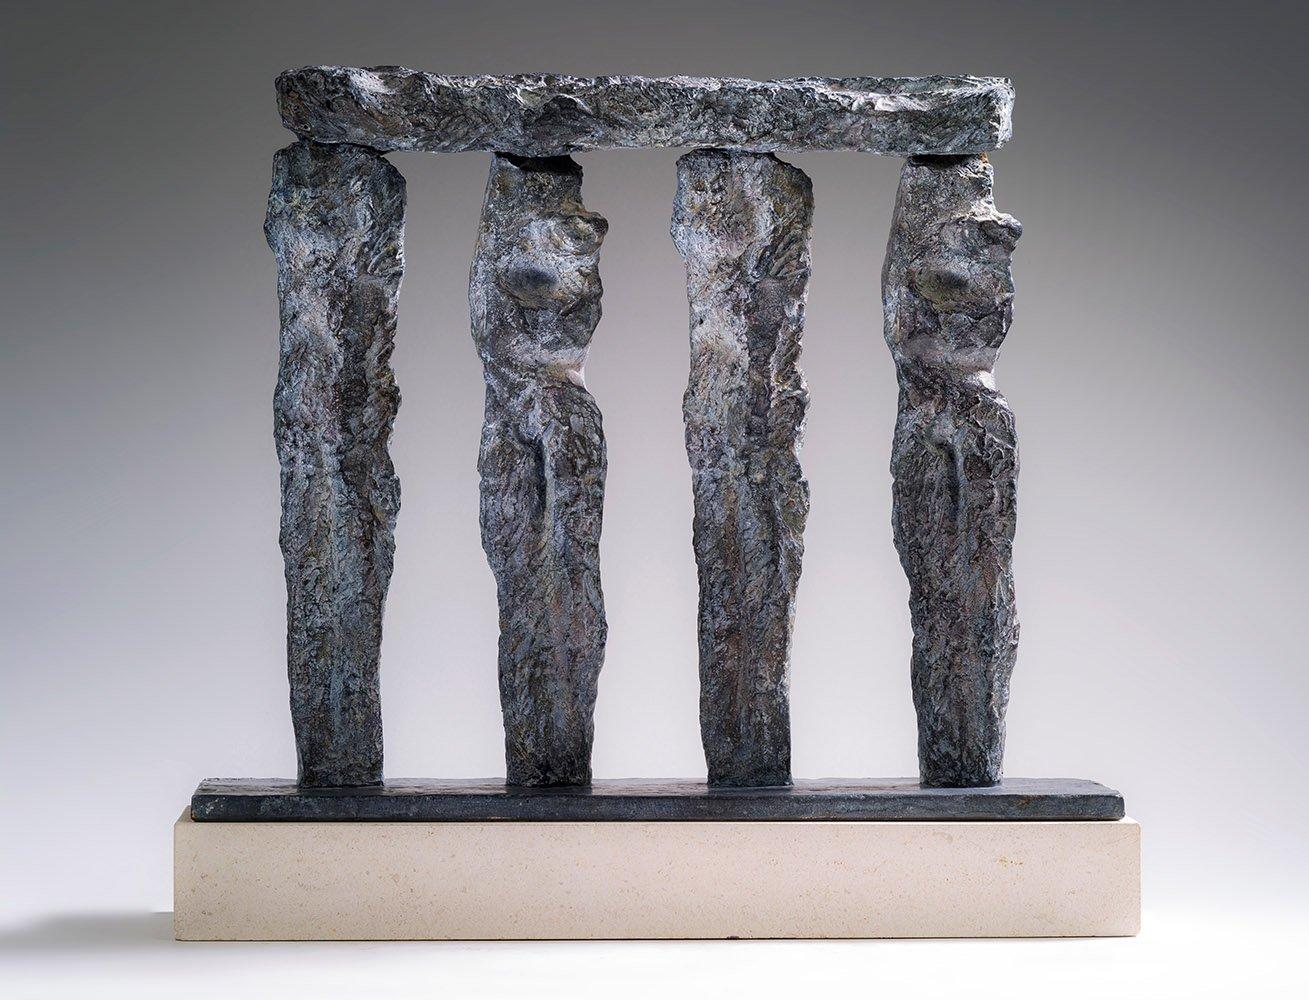 Stonehenge is a bronze sculpture by French contemporary artist Martine Demal, dimensions are 43 × 43 × 12 cm (16.9 × 16.9 × 4.7 in). 
The sculpture is signed and numbered, it is part of a limited edition of 8 editions + 4 artist’s proofs, and comes